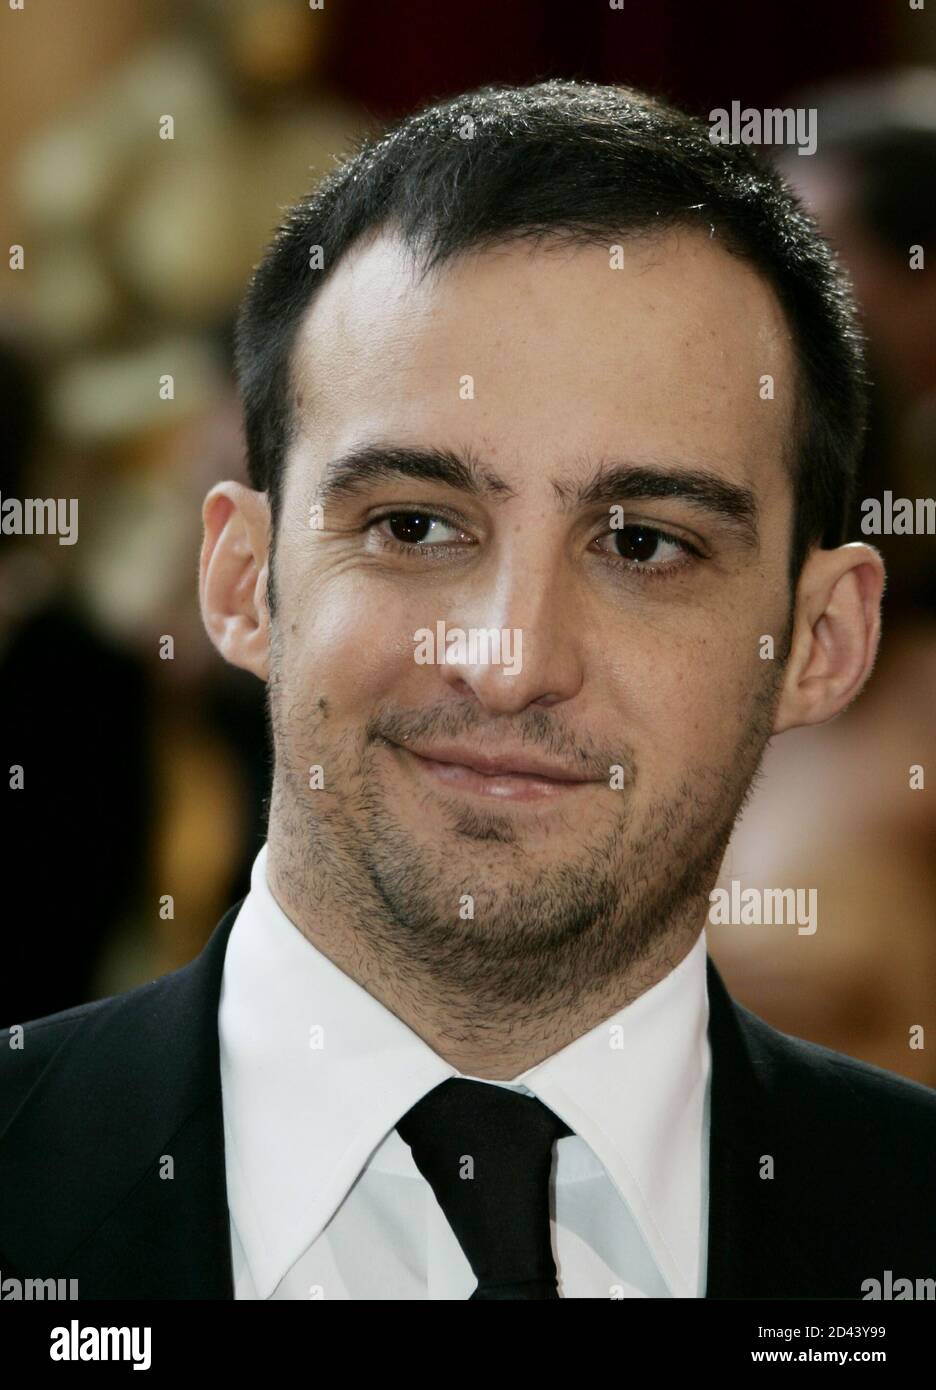 Spanish chilean-born director Alejandro Amenabar arrives at the 77th annual Academy Awards in Hollywood, February 27, 2005.   Amenabar was nominated for his work in the Spanish film 'The Sea Inside. Stock Photo